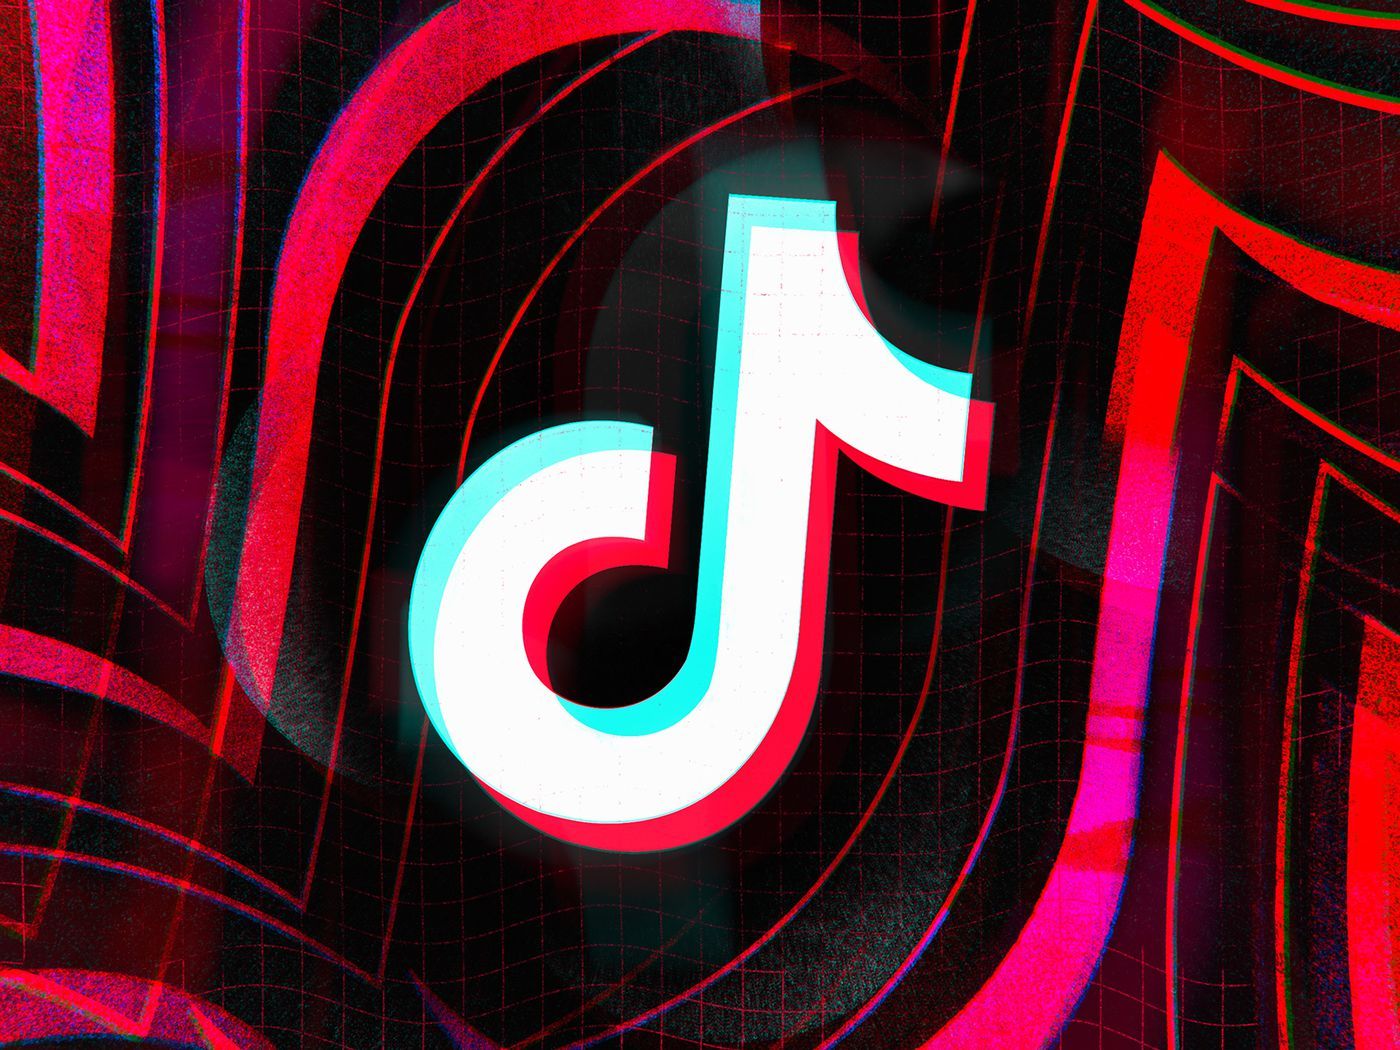 backgrounds for tik tok